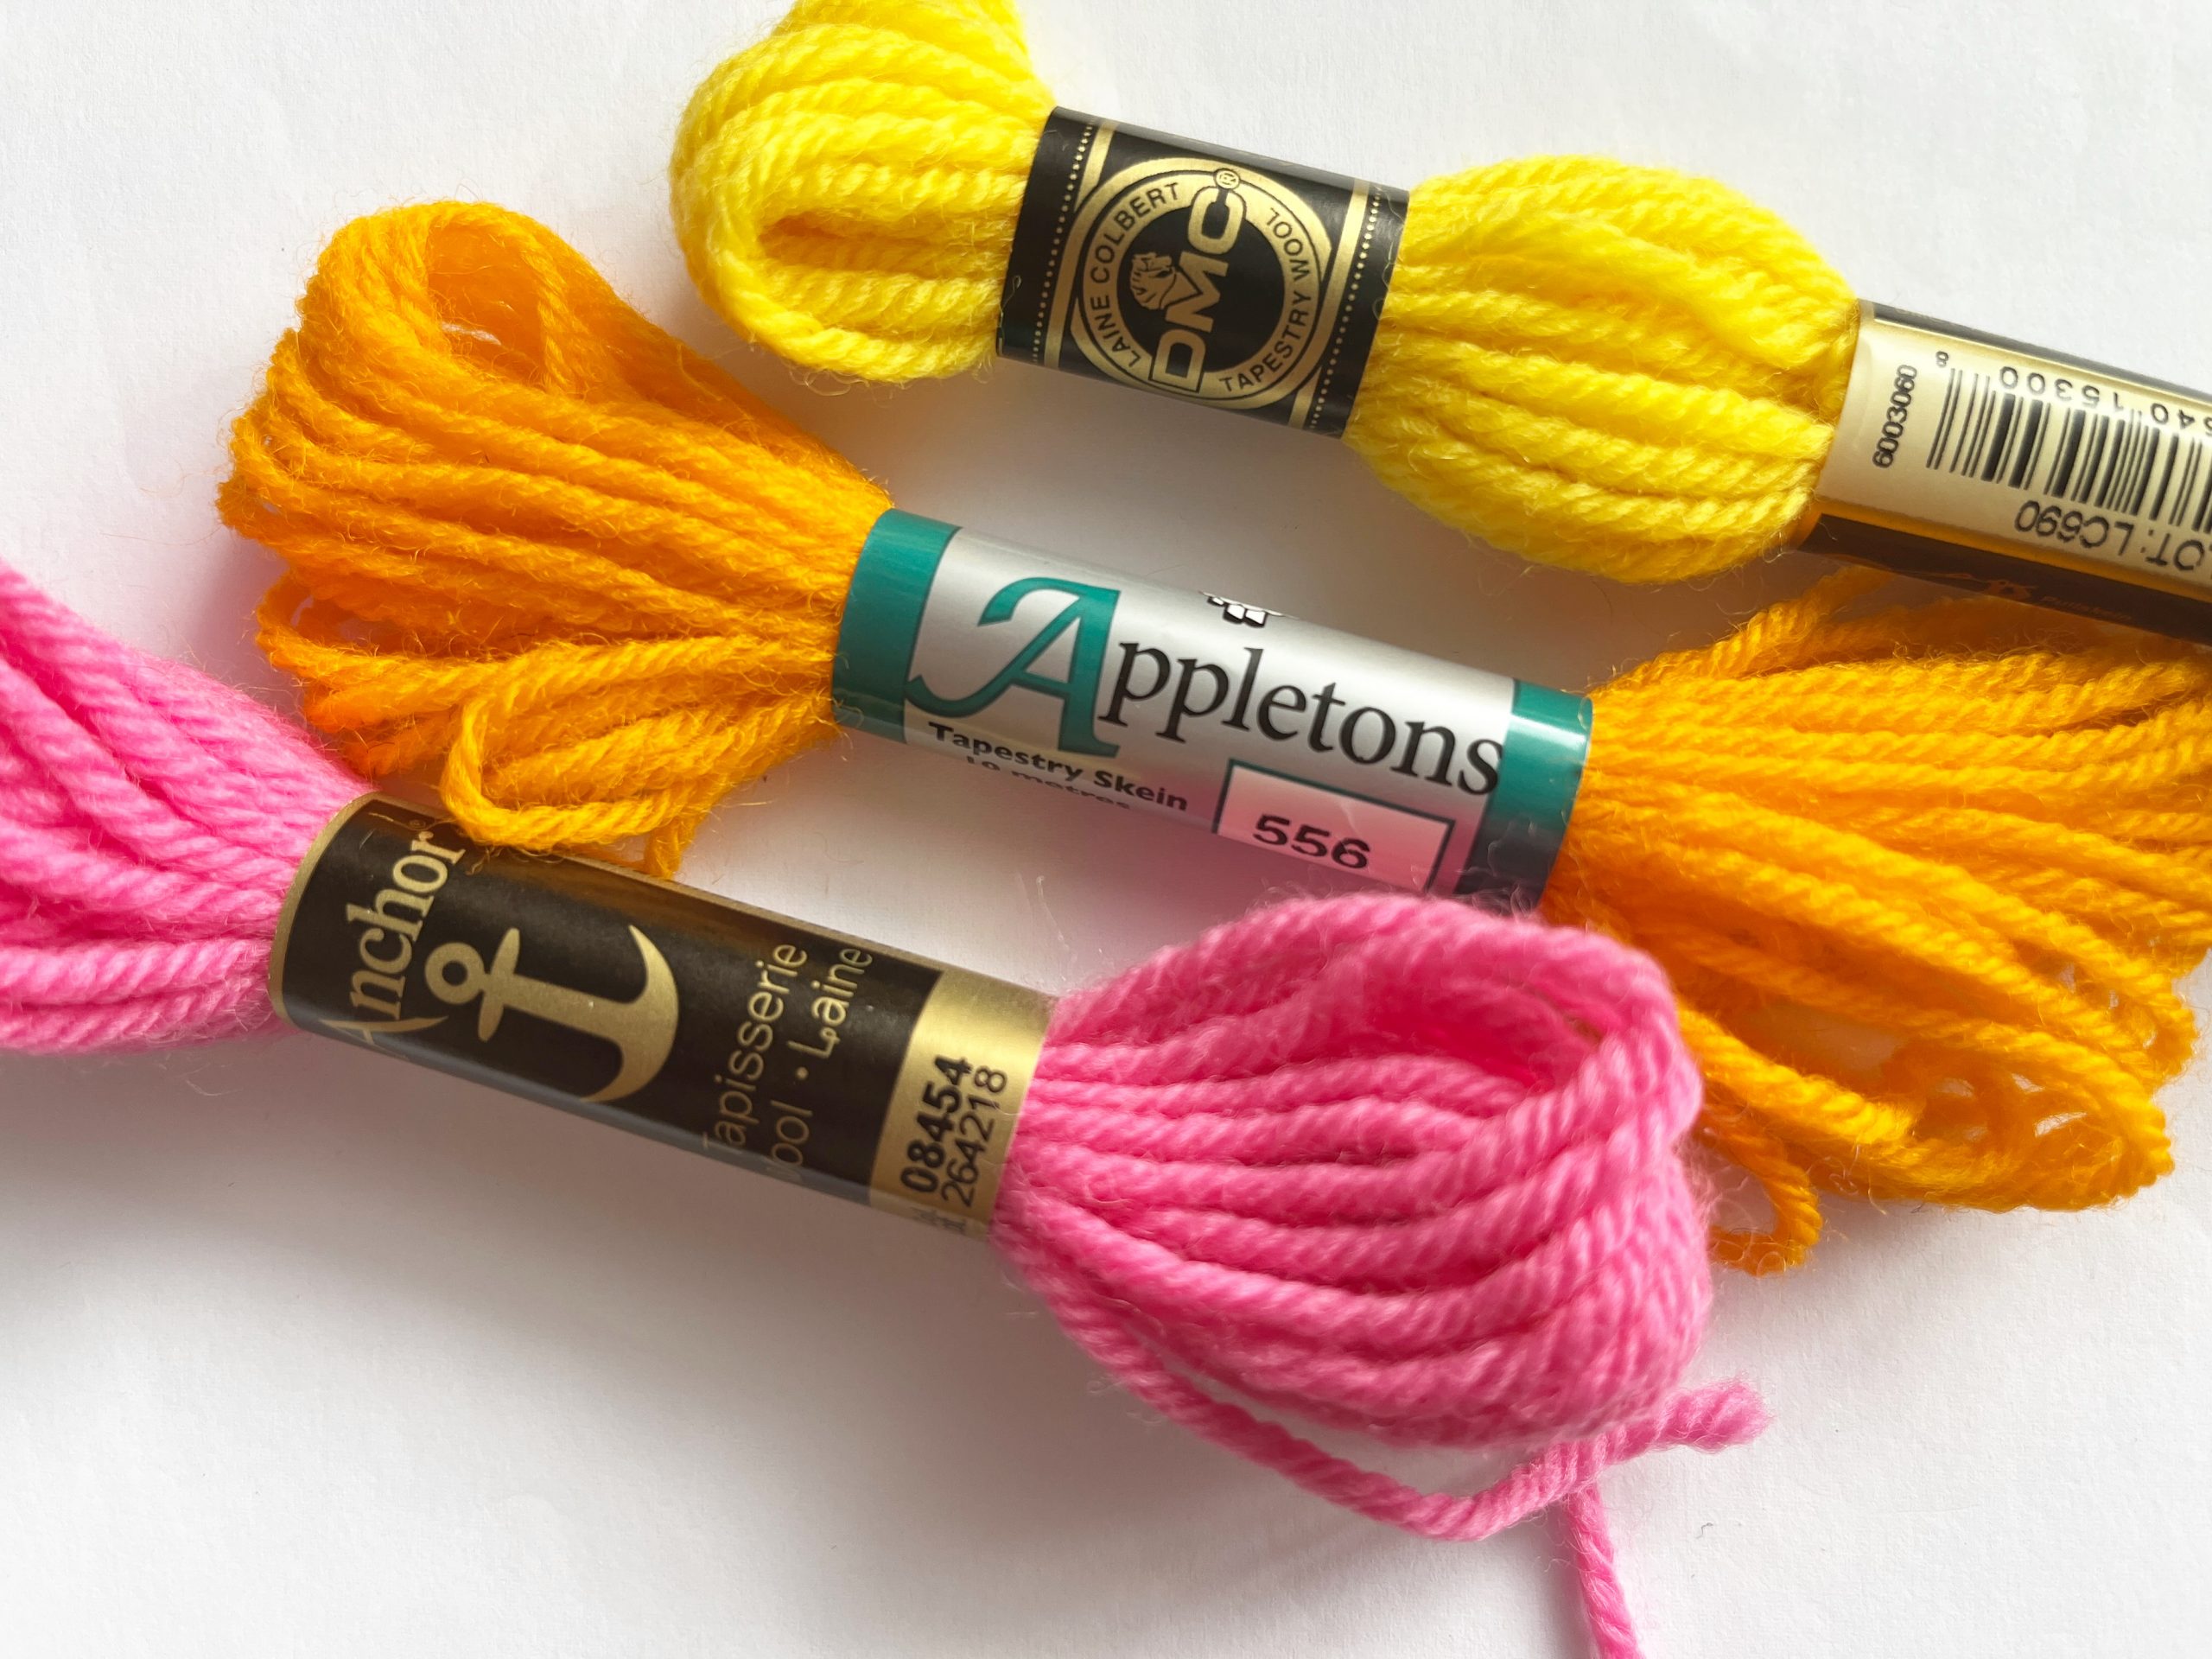 Three skeins of tapestry wool sit on a plain background. One skein is from Anchor, one from Appletons and one from DMC.